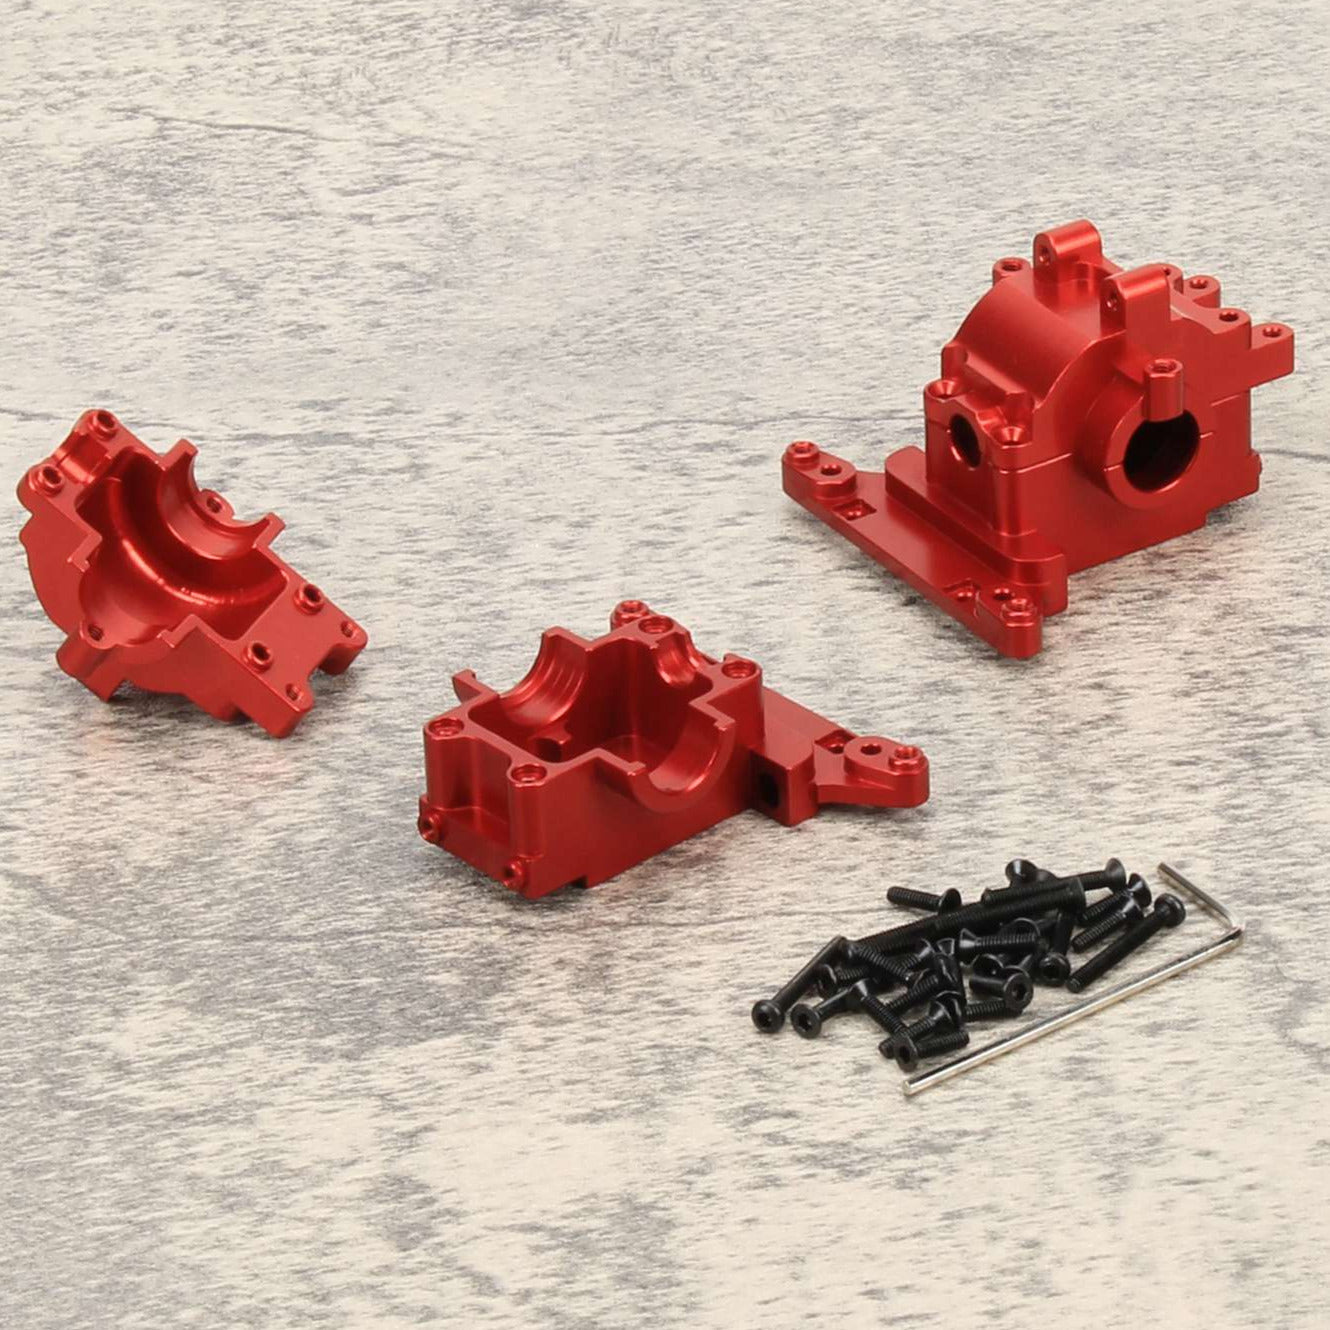 RCAWD REDCAT GEN8 Red / Two Set RCAWD Alloy Differential Housing for 1/18 Traxxas Upgrade Parts